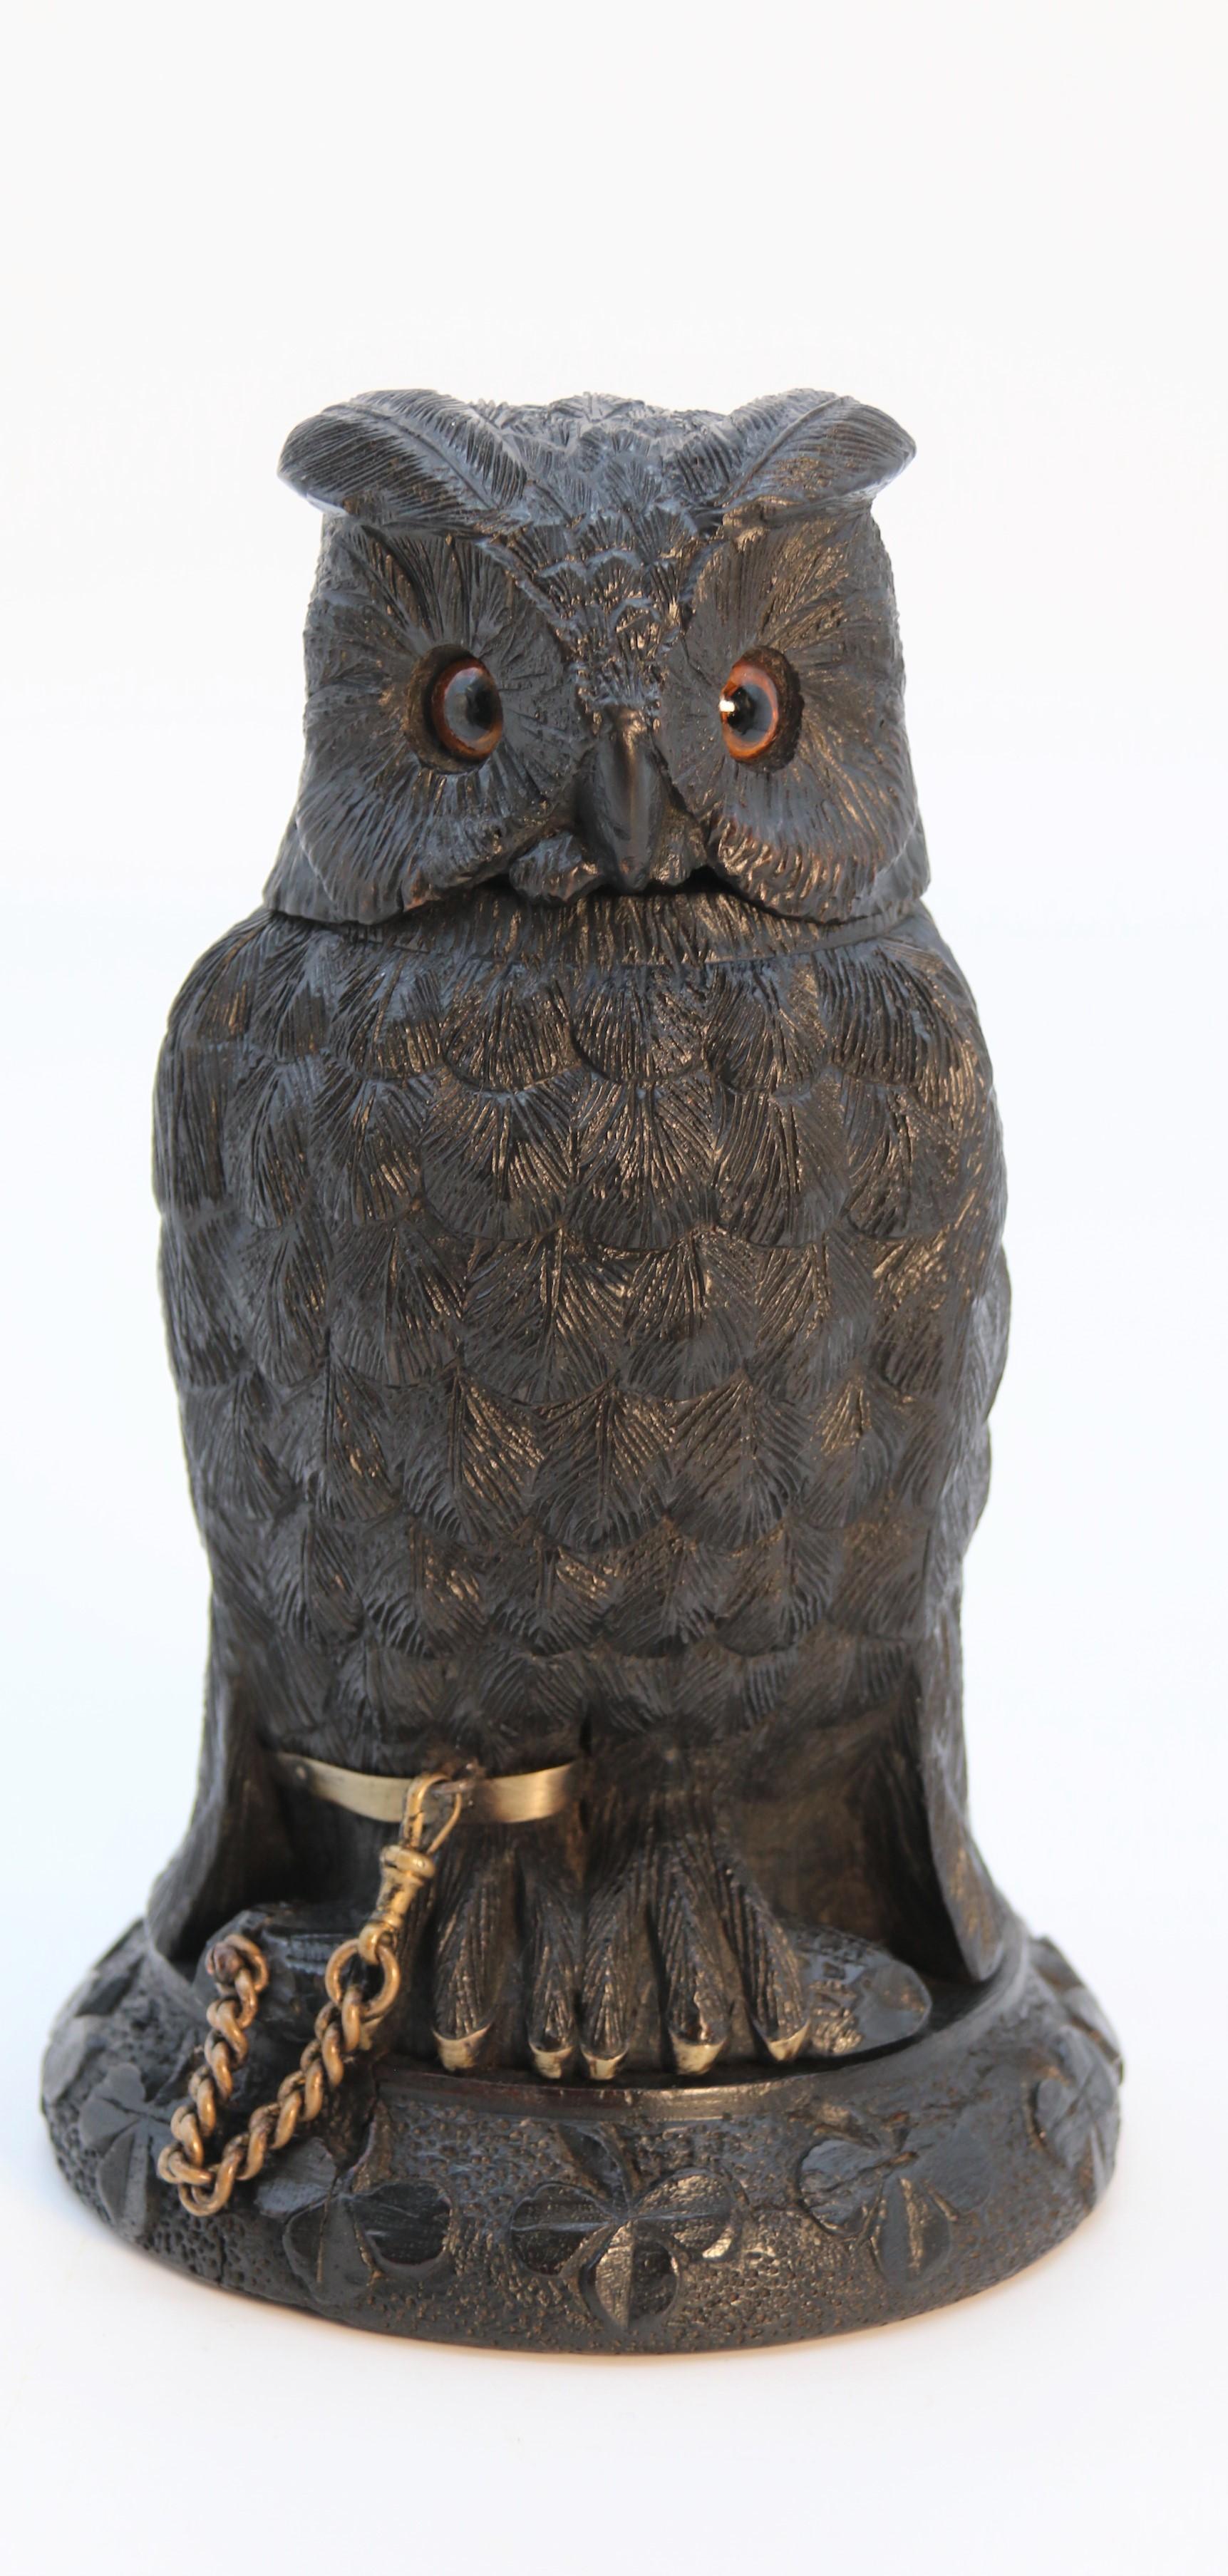 An Irish bog oak hand carved inkstand in the form of an owl
Attributed to Cornelius Goggin, Dublin Ireland

This exceptional bog oak inkstand is of a very rare and desirable form. It is beautifully hand carved as a perched pet owl. It is a museum